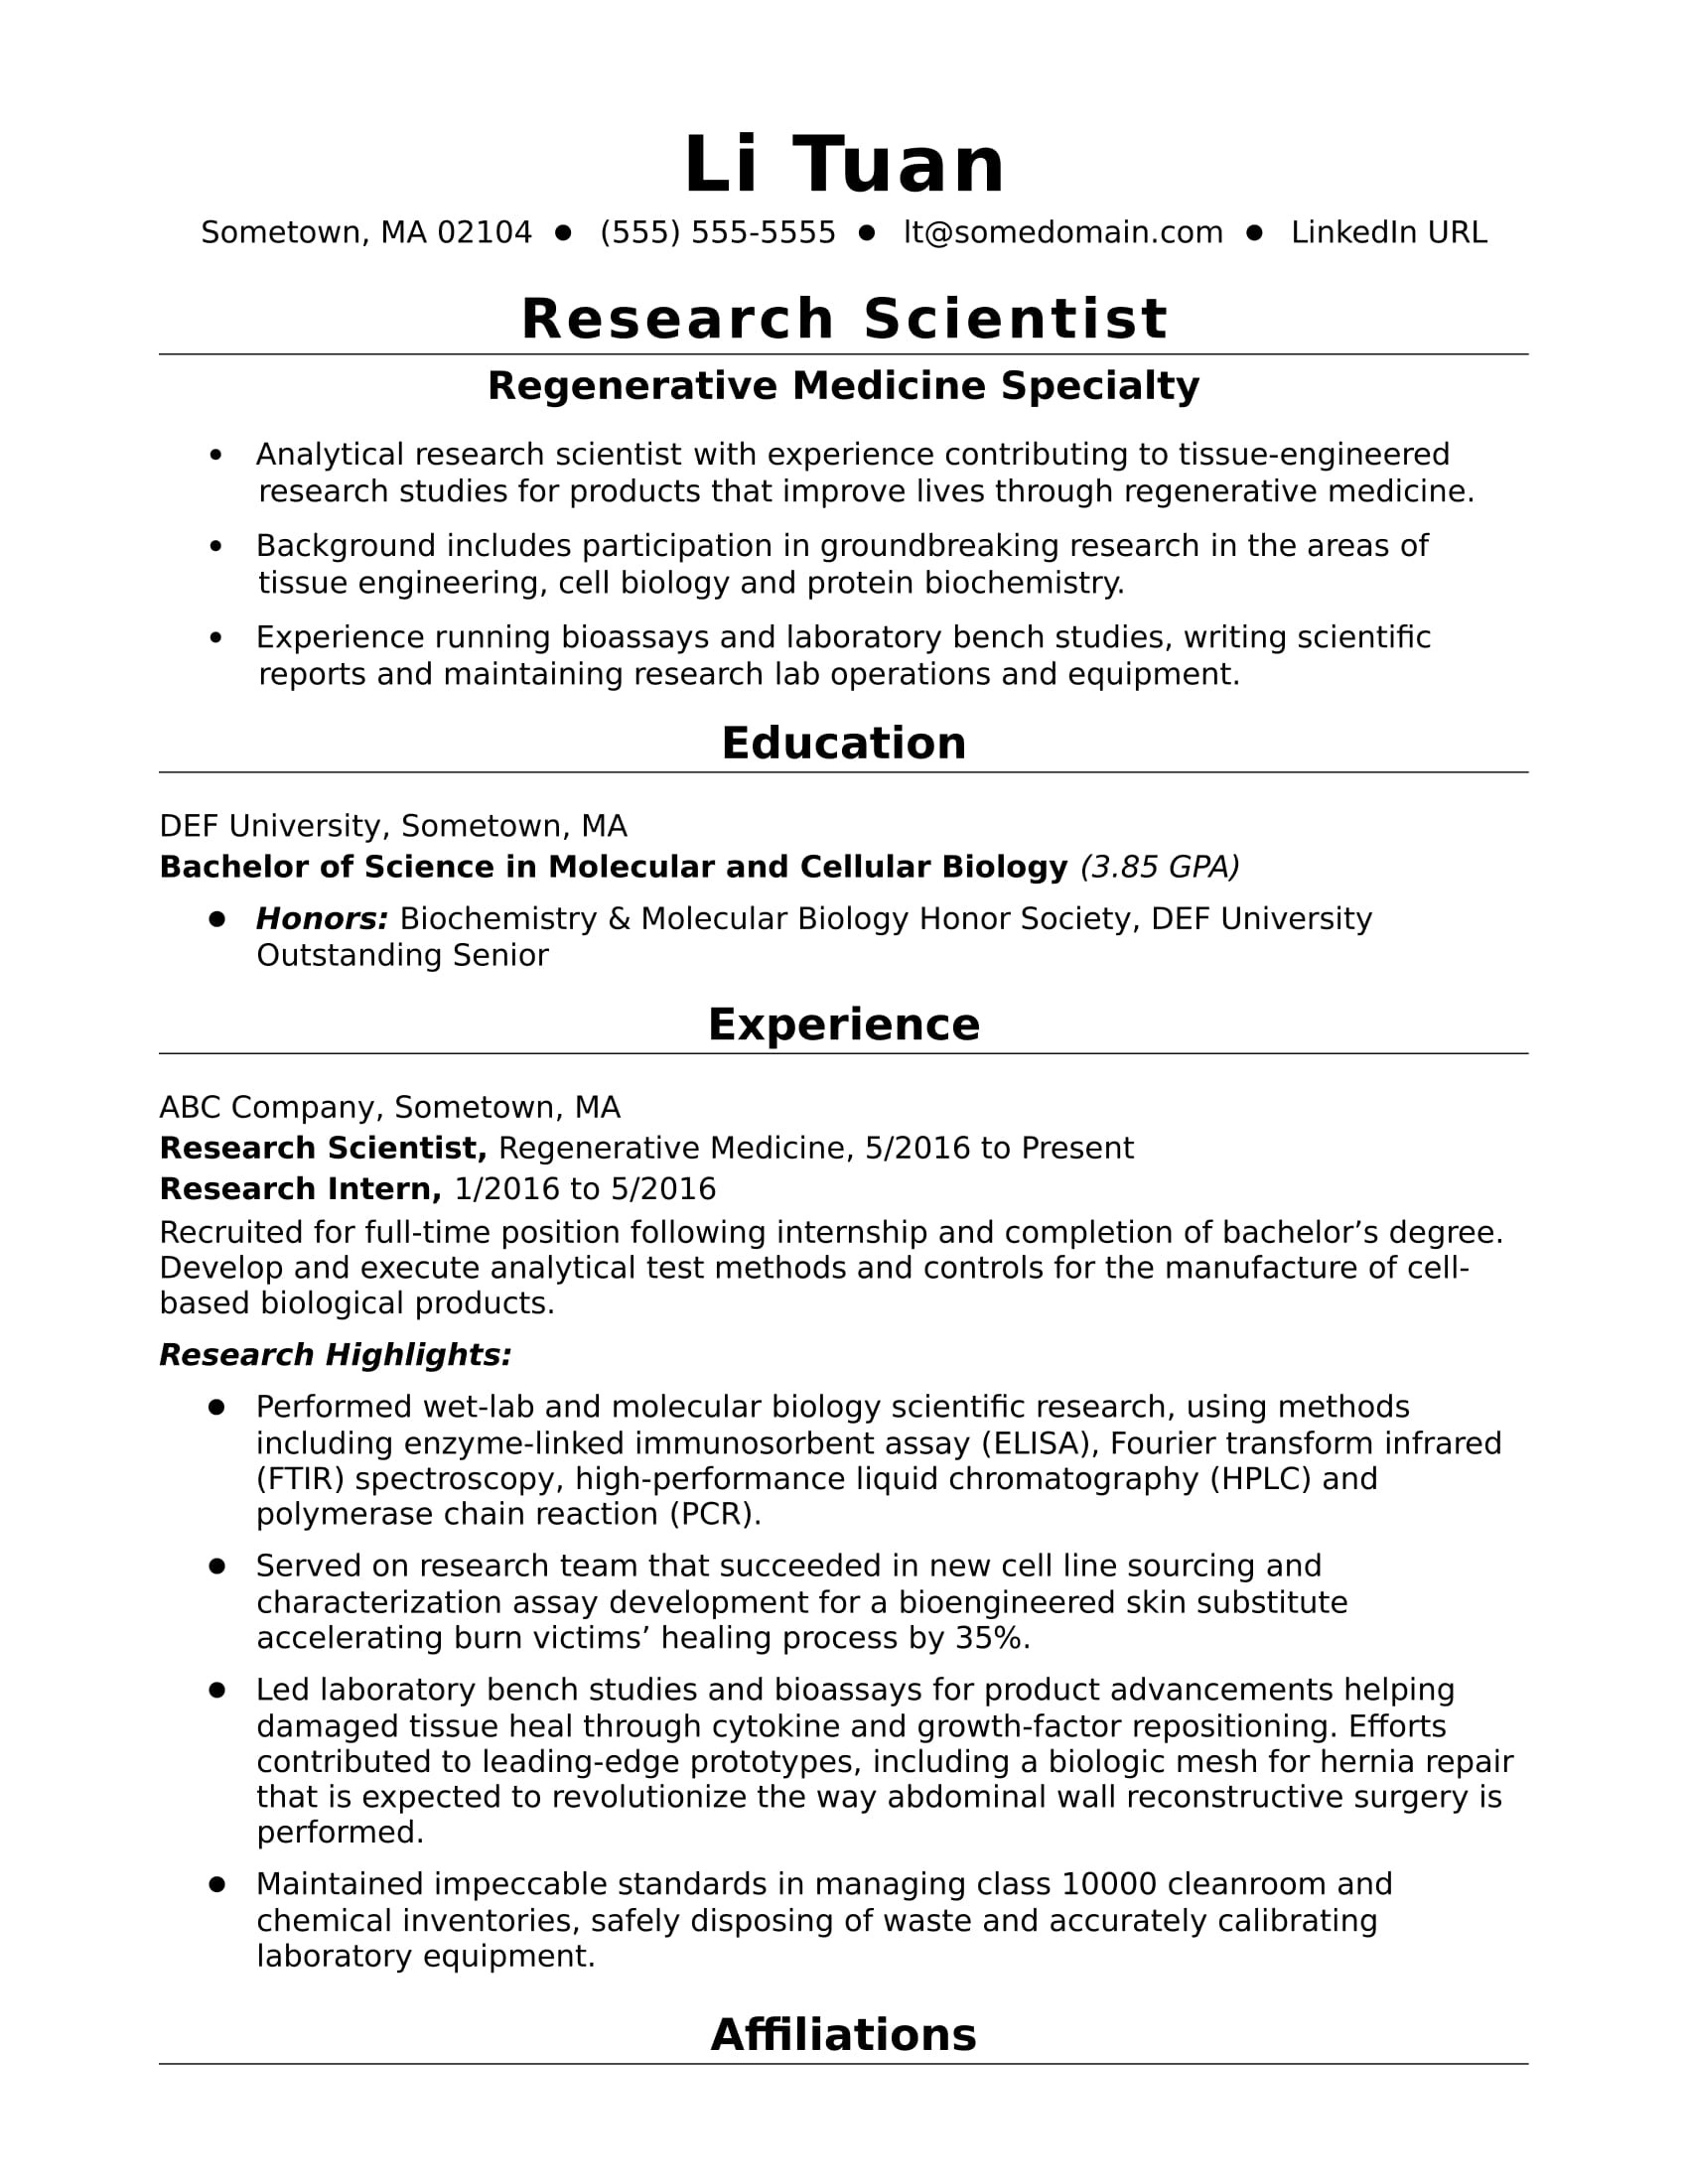 Entry Level Operations Research Analyst Resume Samples Entry-level Research Scientist Resume Sample Monster.com